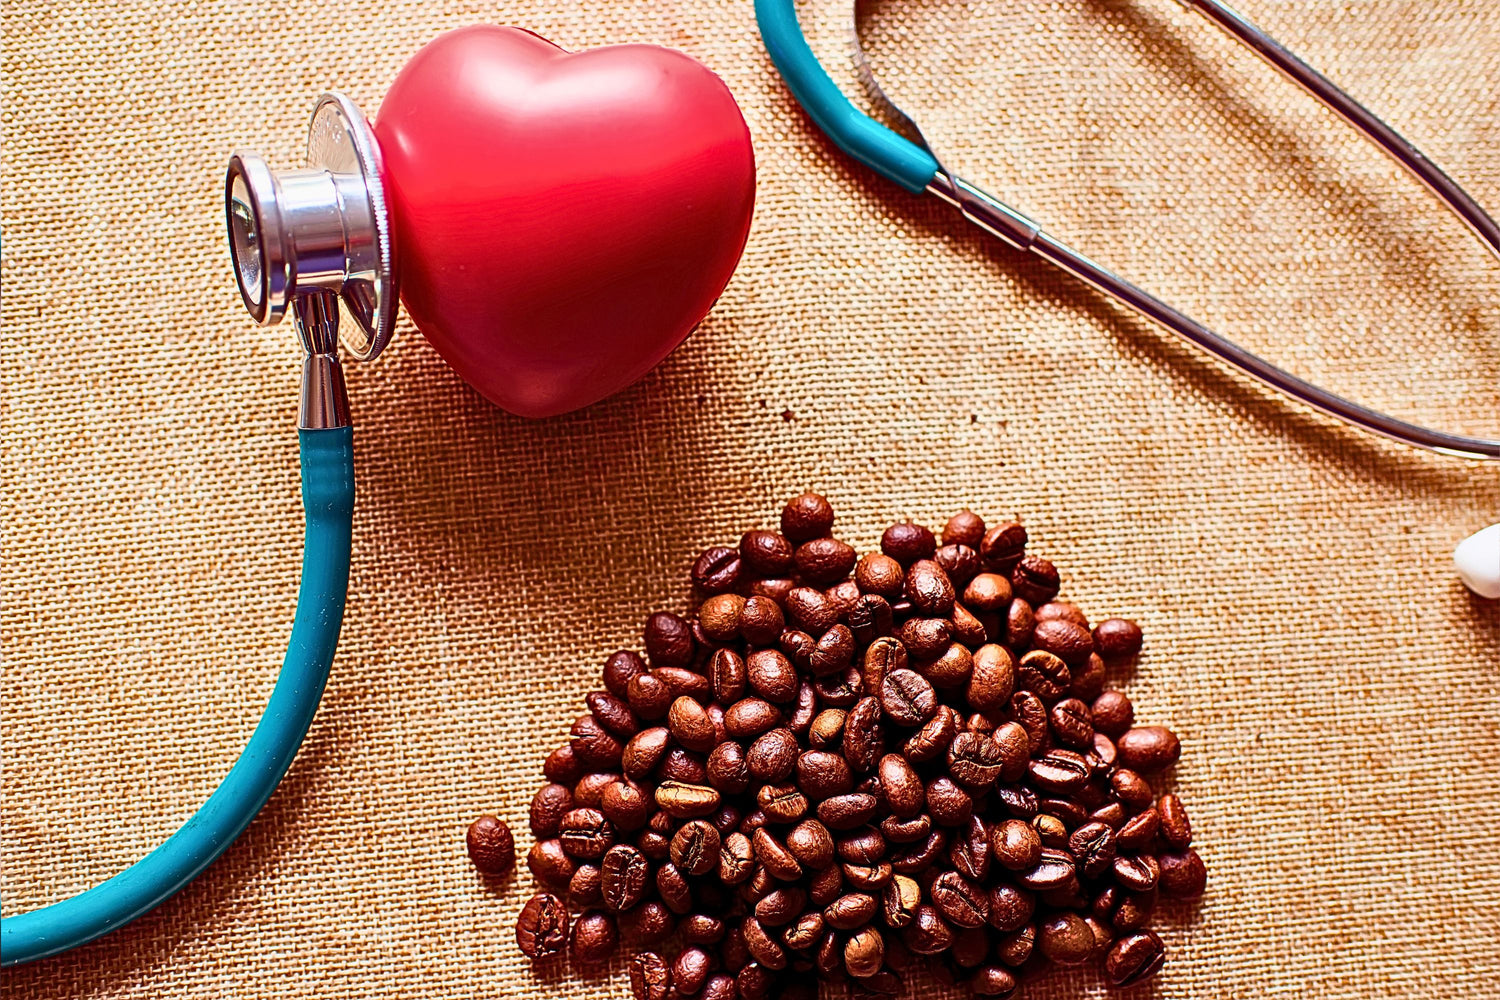 Stethoscope on a fake heart next to coffee beans